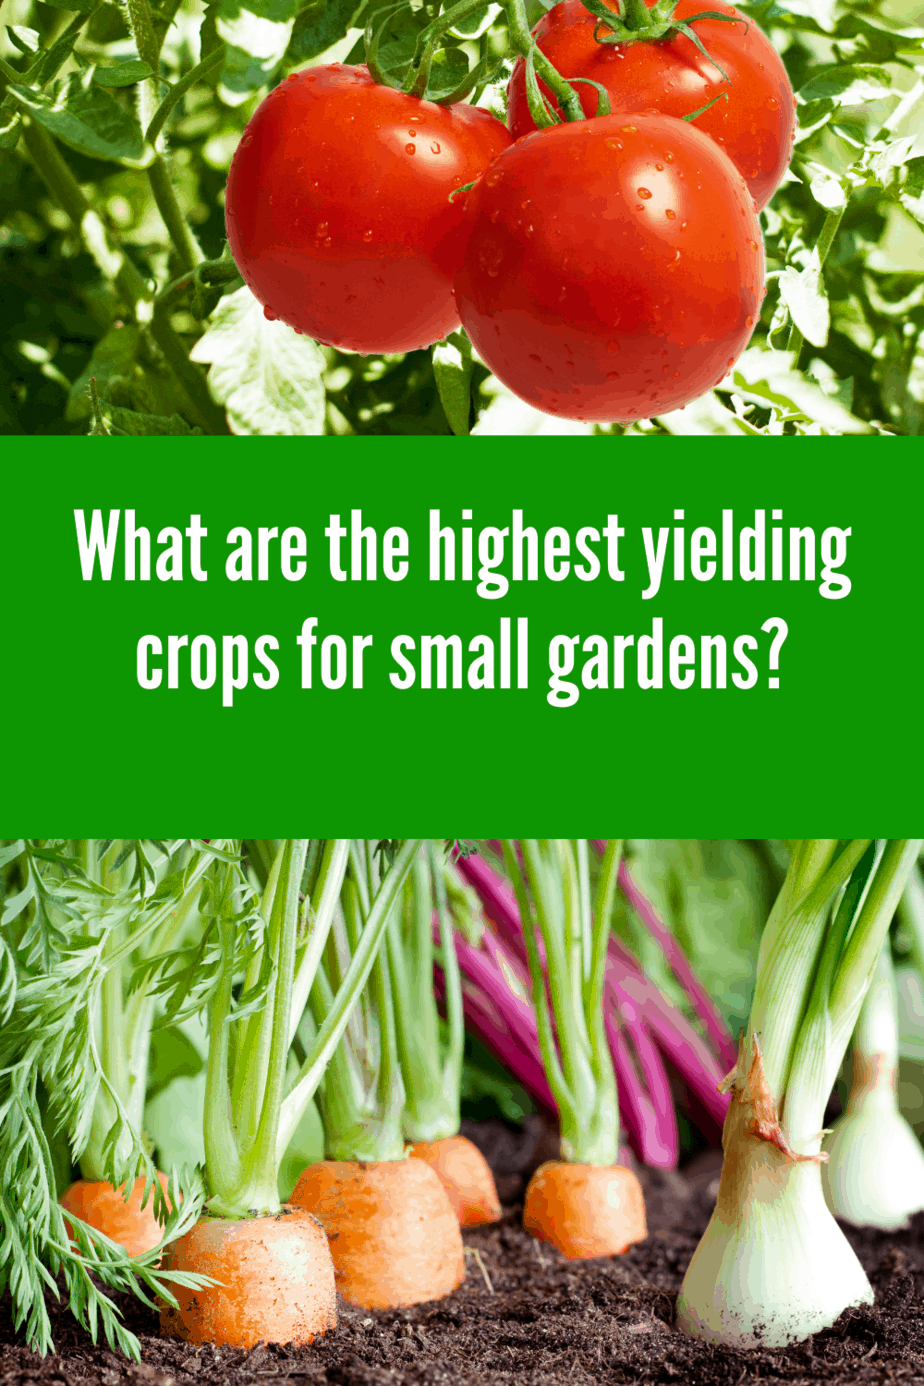 High Yield Crops for Small Gardens